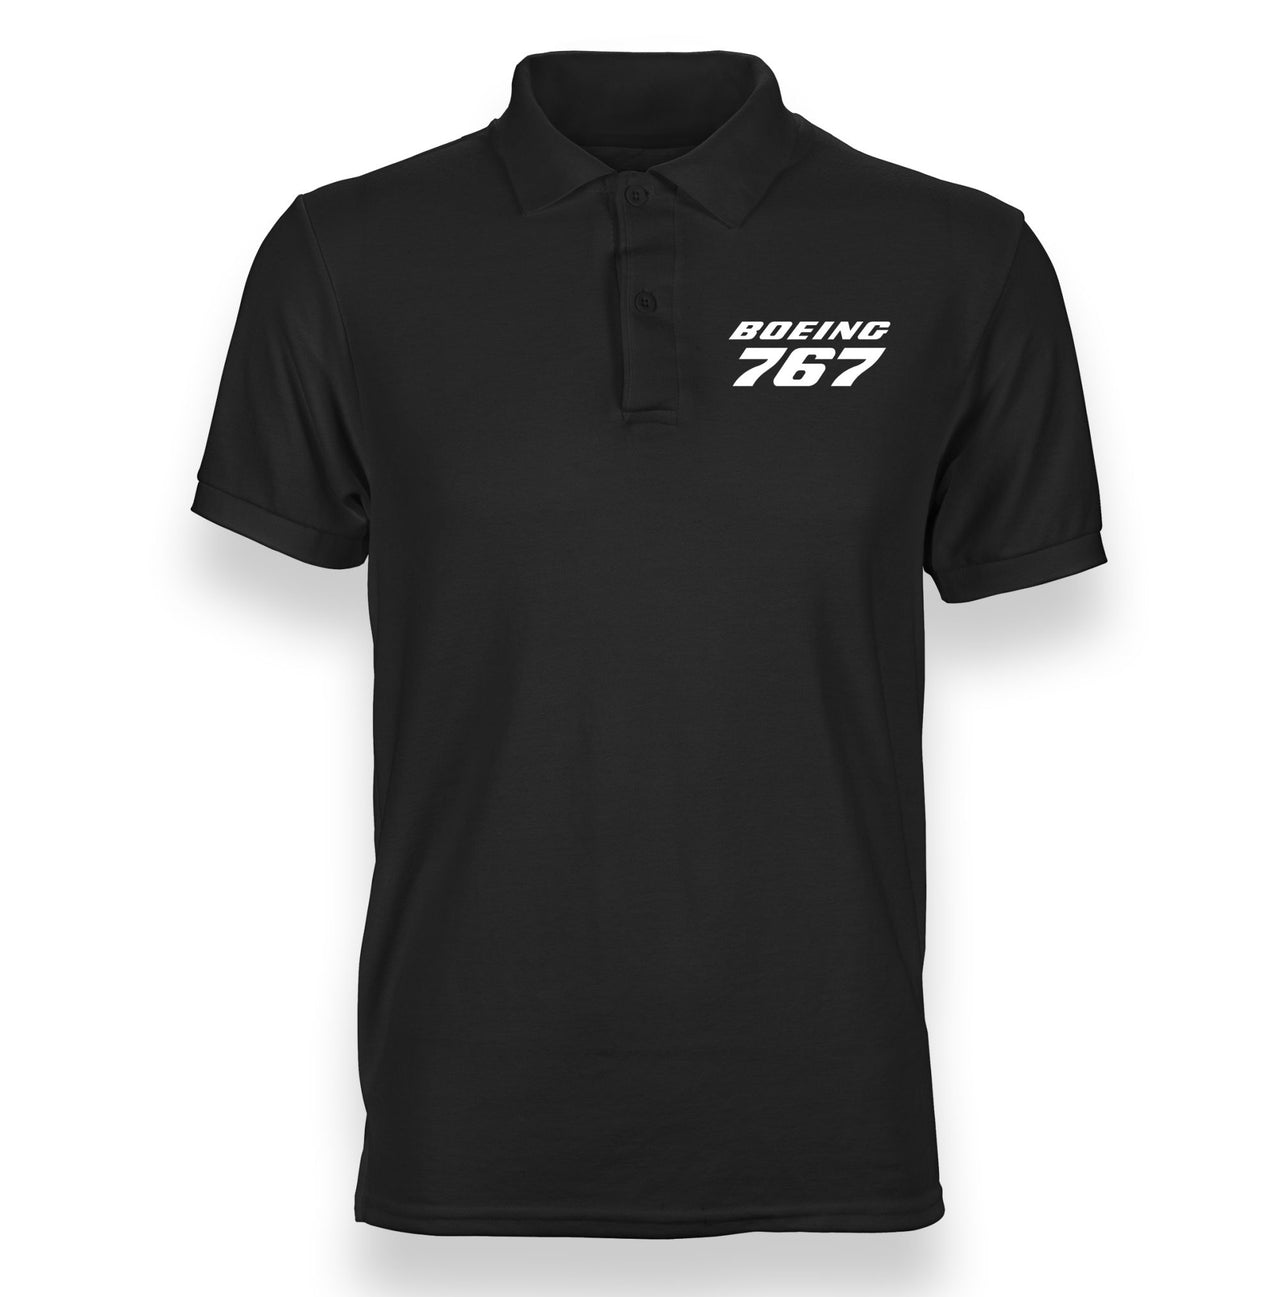 Boeing 767 & Text Designed "WOMEN" Polo T-Shirts